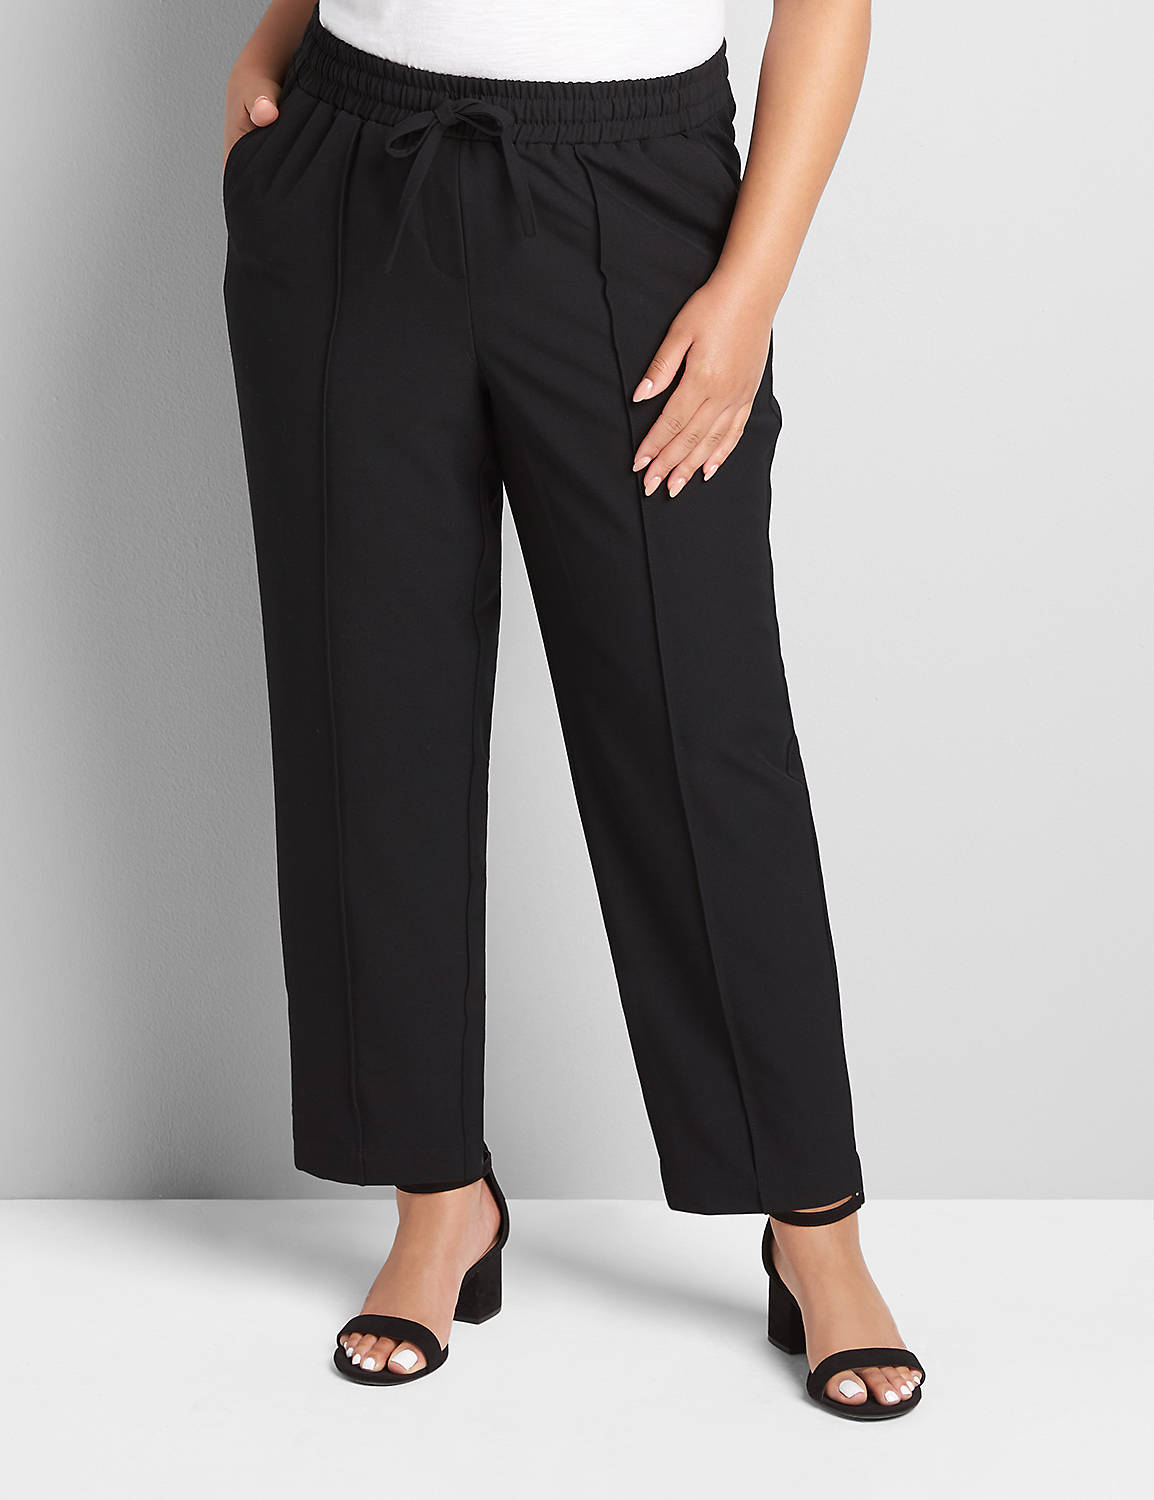 Relaxed Ankle Pant | LaneBryant